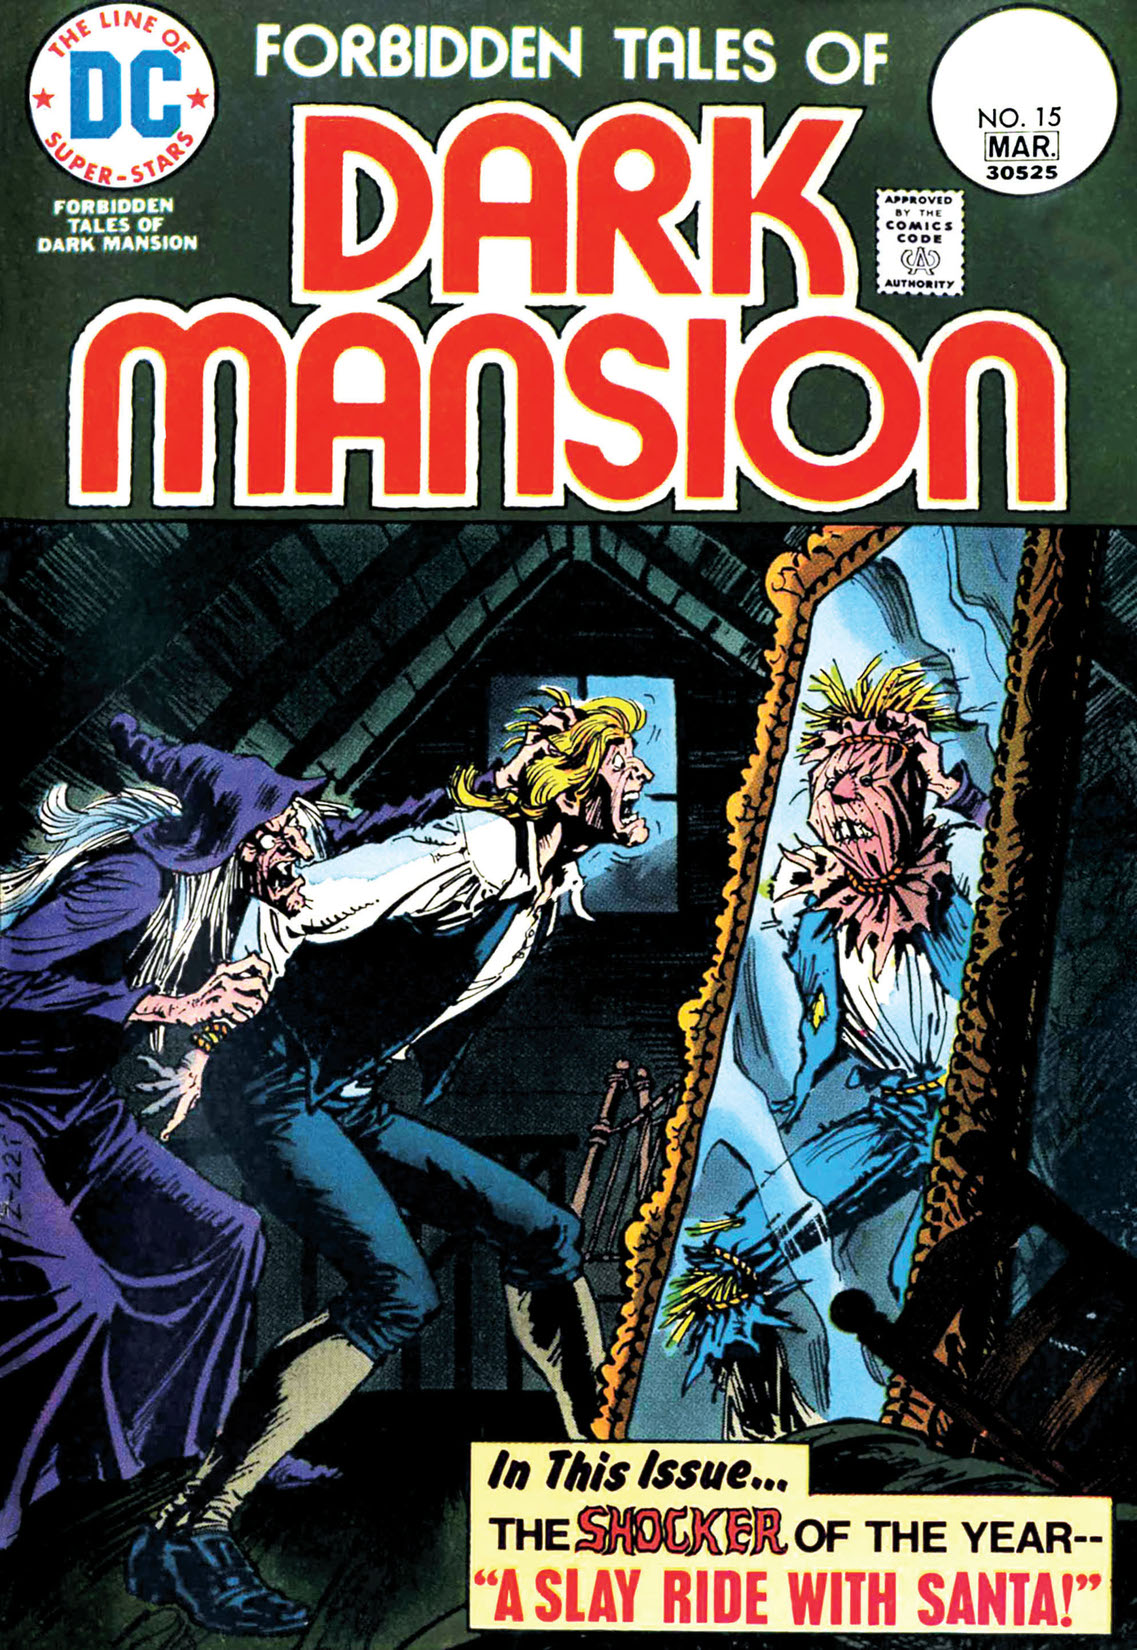 Forbidden Tales of Dark Mansion #15 preview images